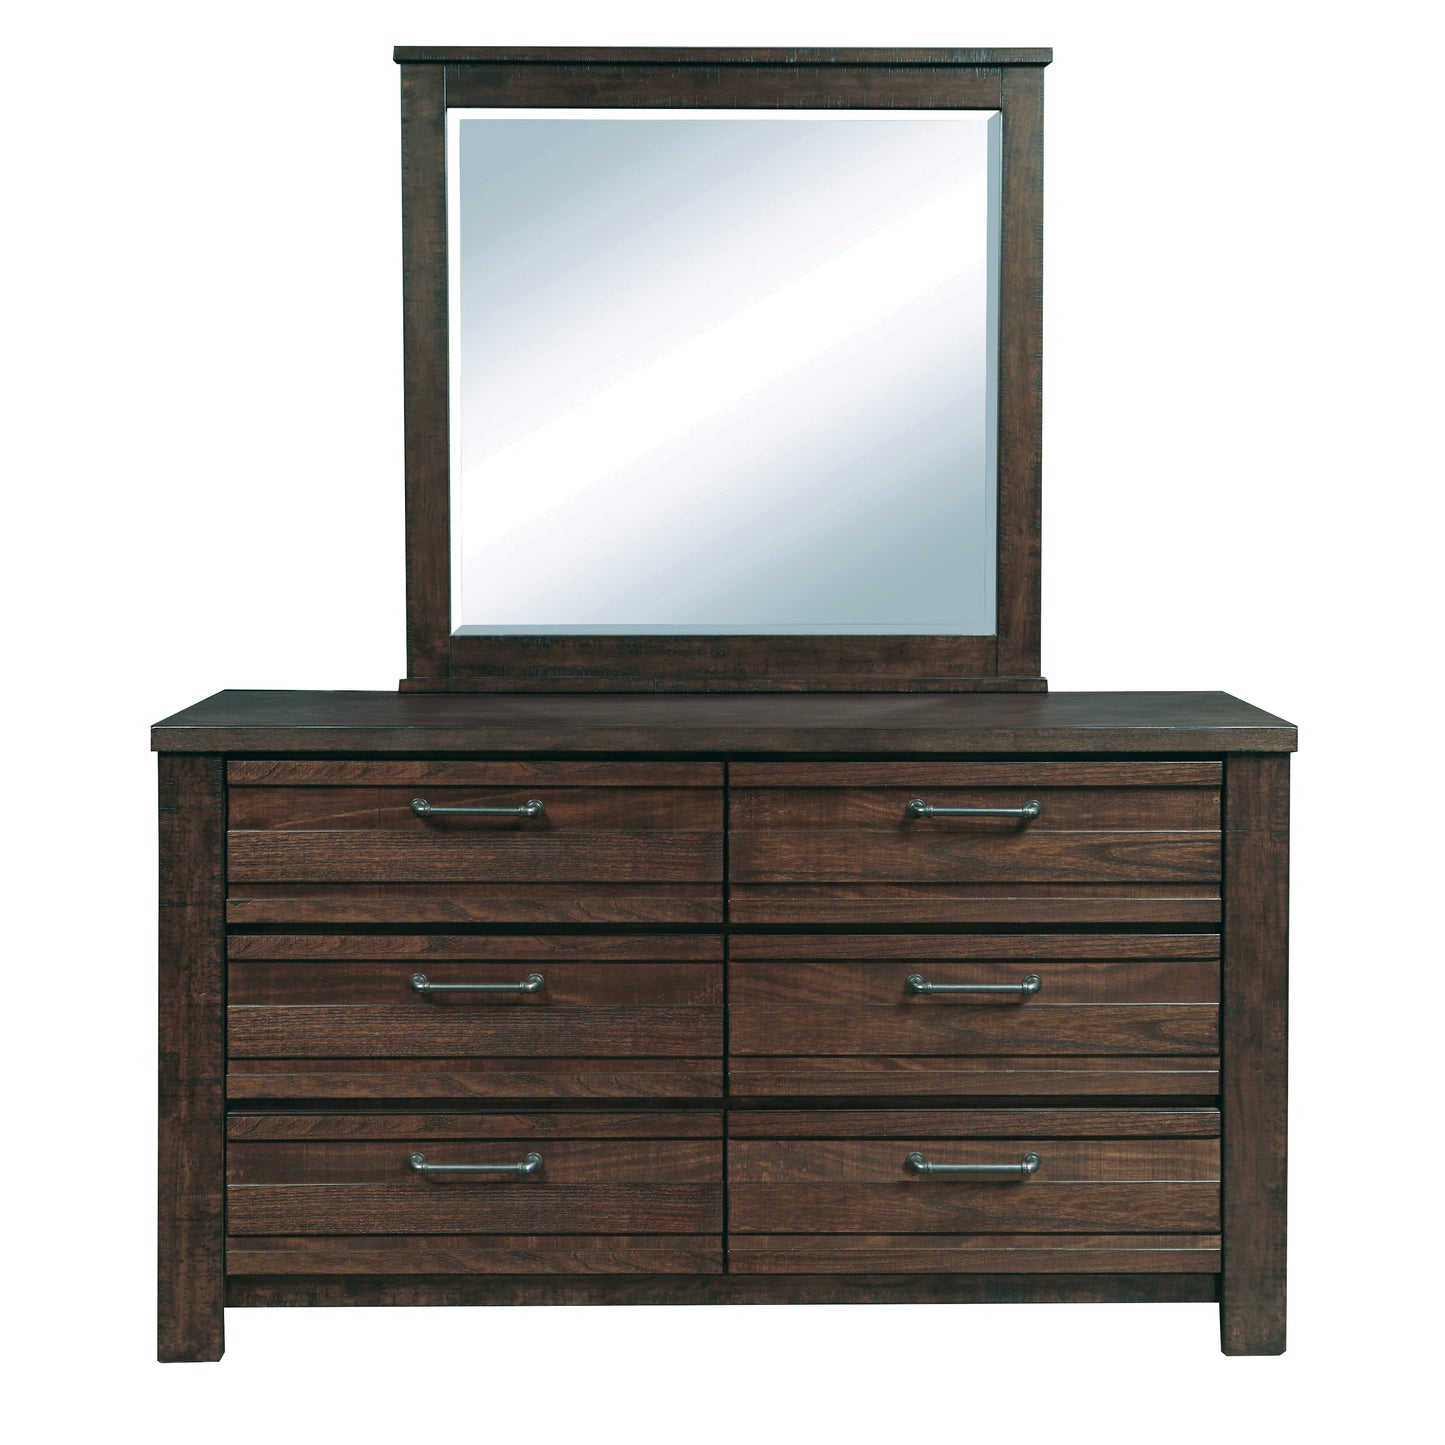 Sedona Transitional Wood 6-Drawer Dresser and Mirror in Espresso